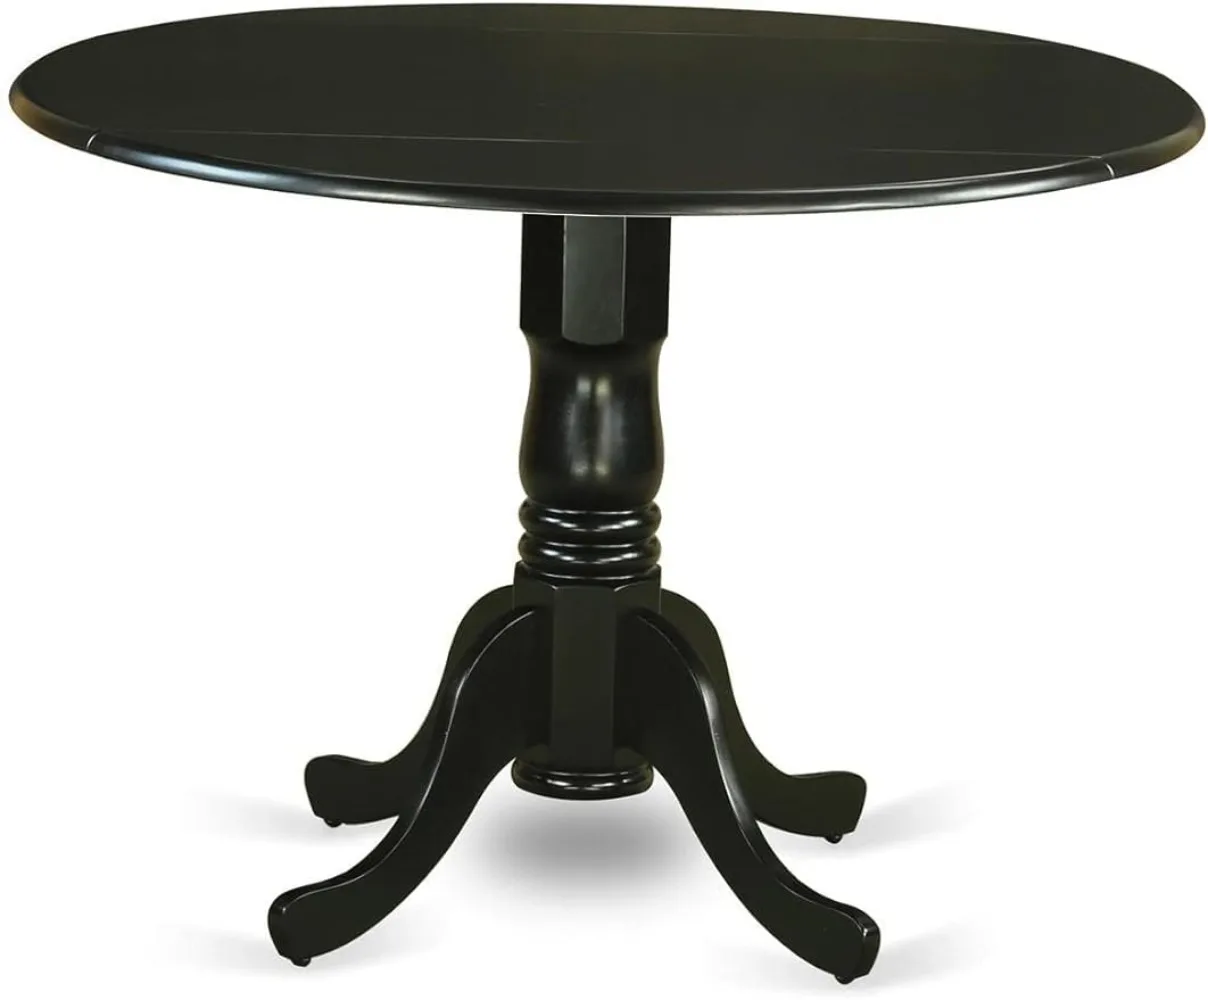 

East West Furniture DLT-BLK-TP Dublin Modern Kitchen Table - a Round Dining Table Top with Dropleaf & Pedestal Base, 42x42 Inch